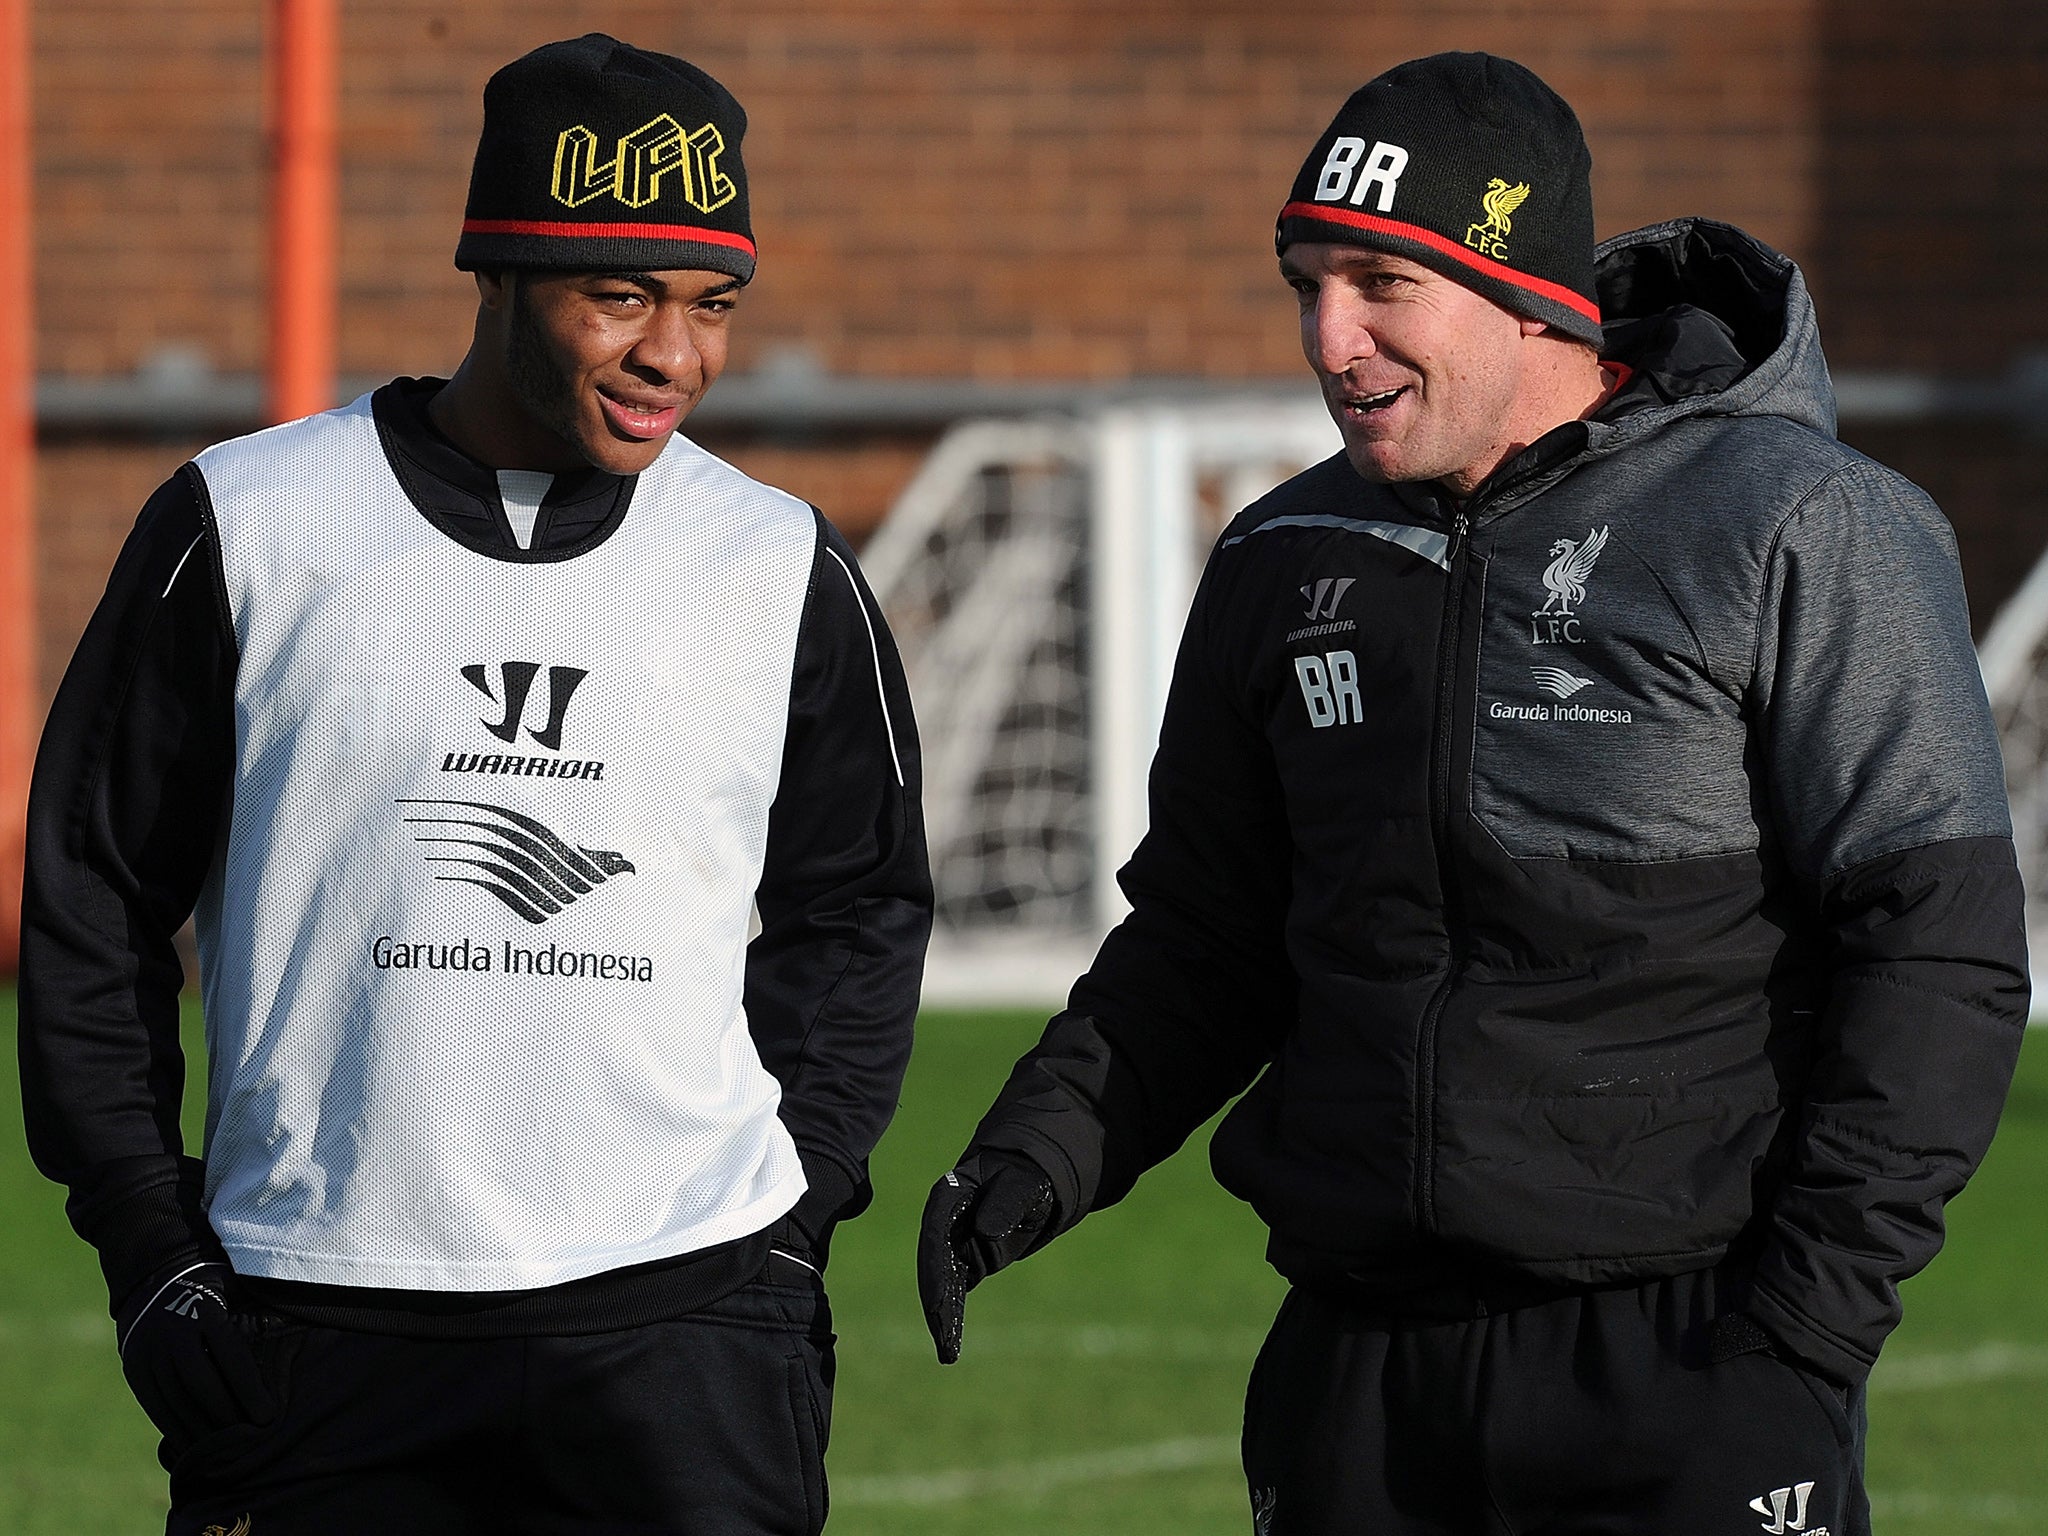 Agent Aidy Ward was suspicious that Rodgers had asked the club photographer to picture he and Sterling together